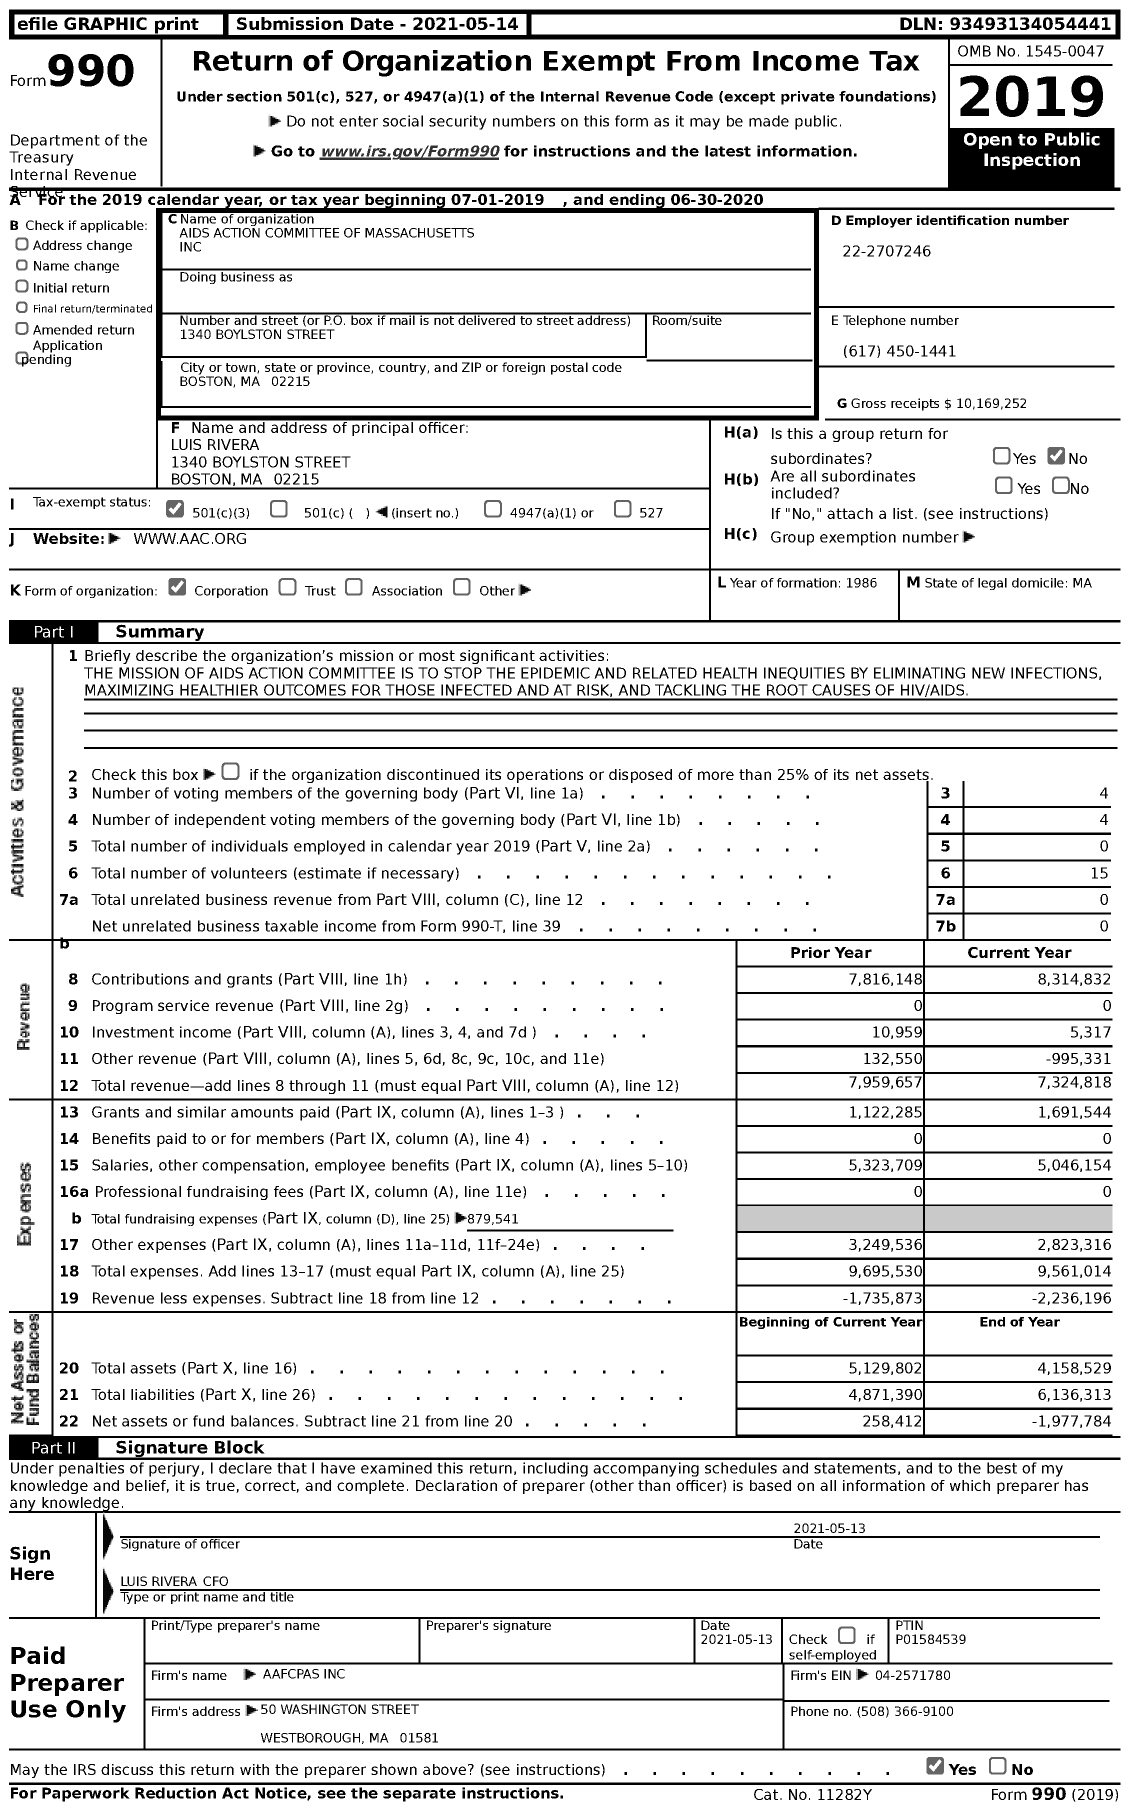 Image of first page of 2019 Form 990 for Aids Action Committee of Massachusetts (AAC)